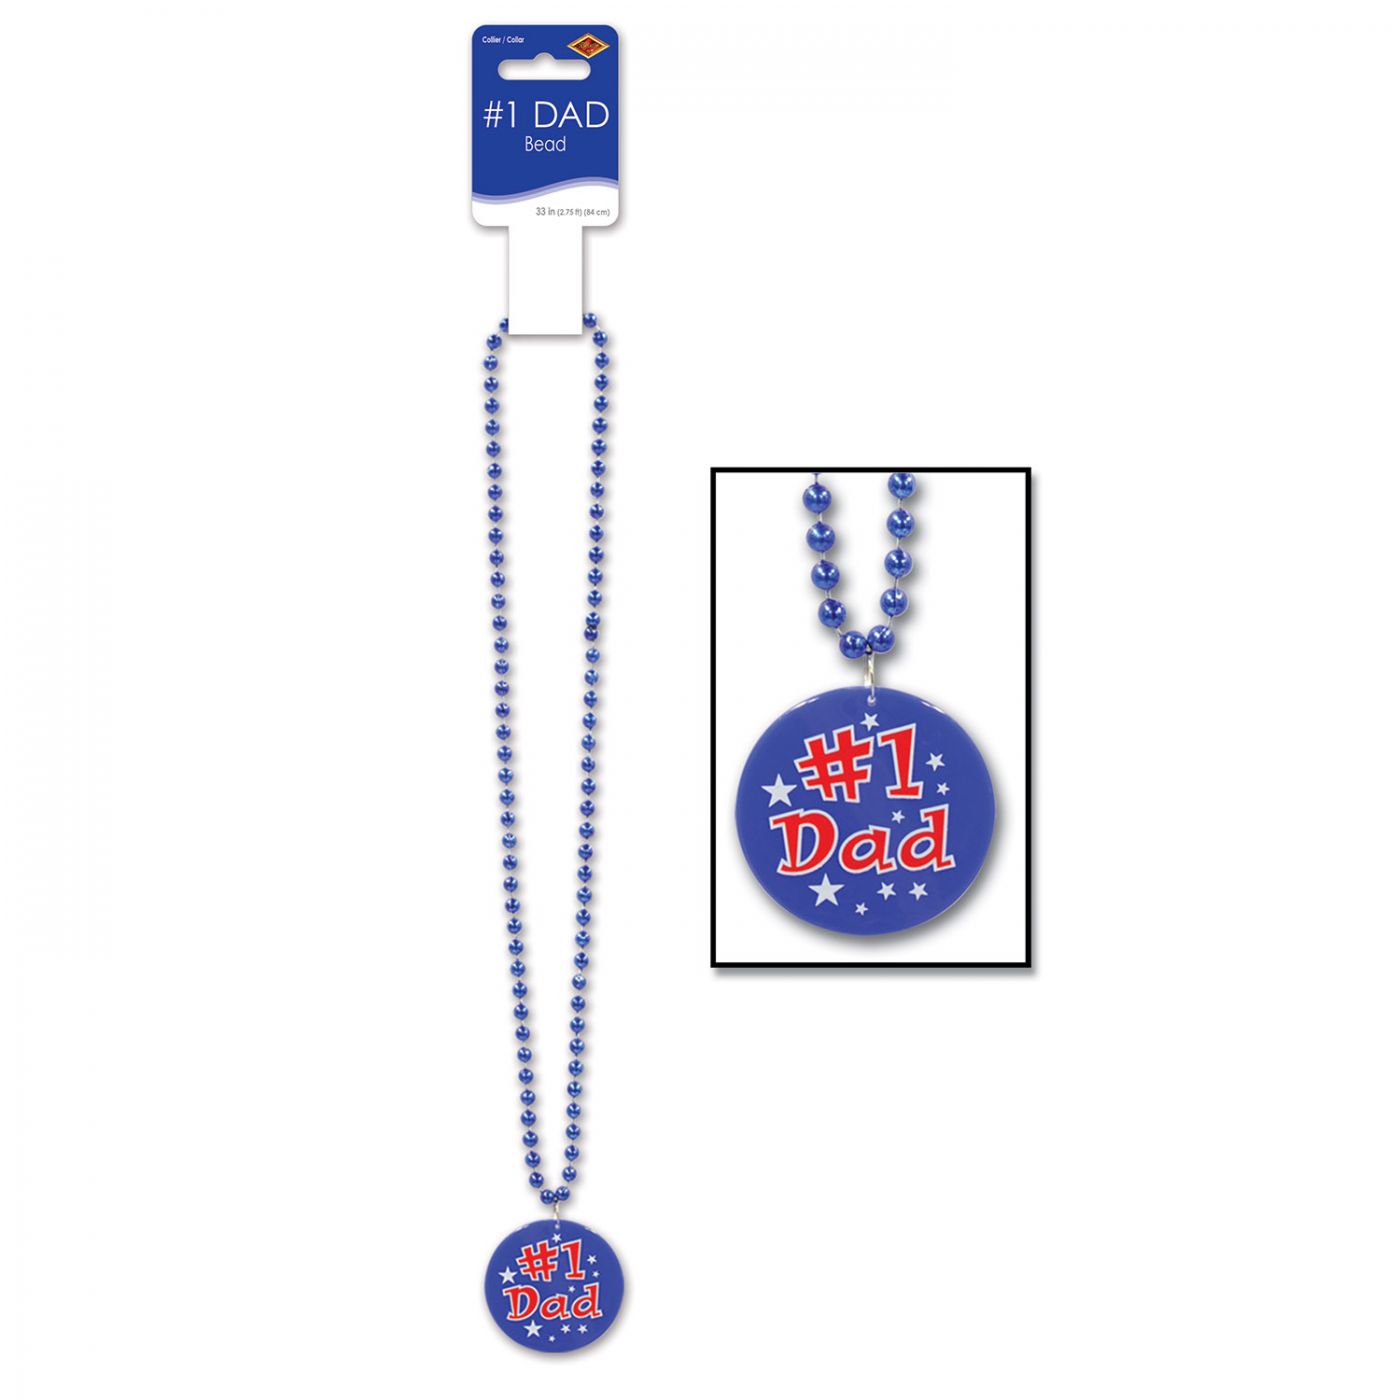 Image of Beads w/Printed #1 Dad Medallion